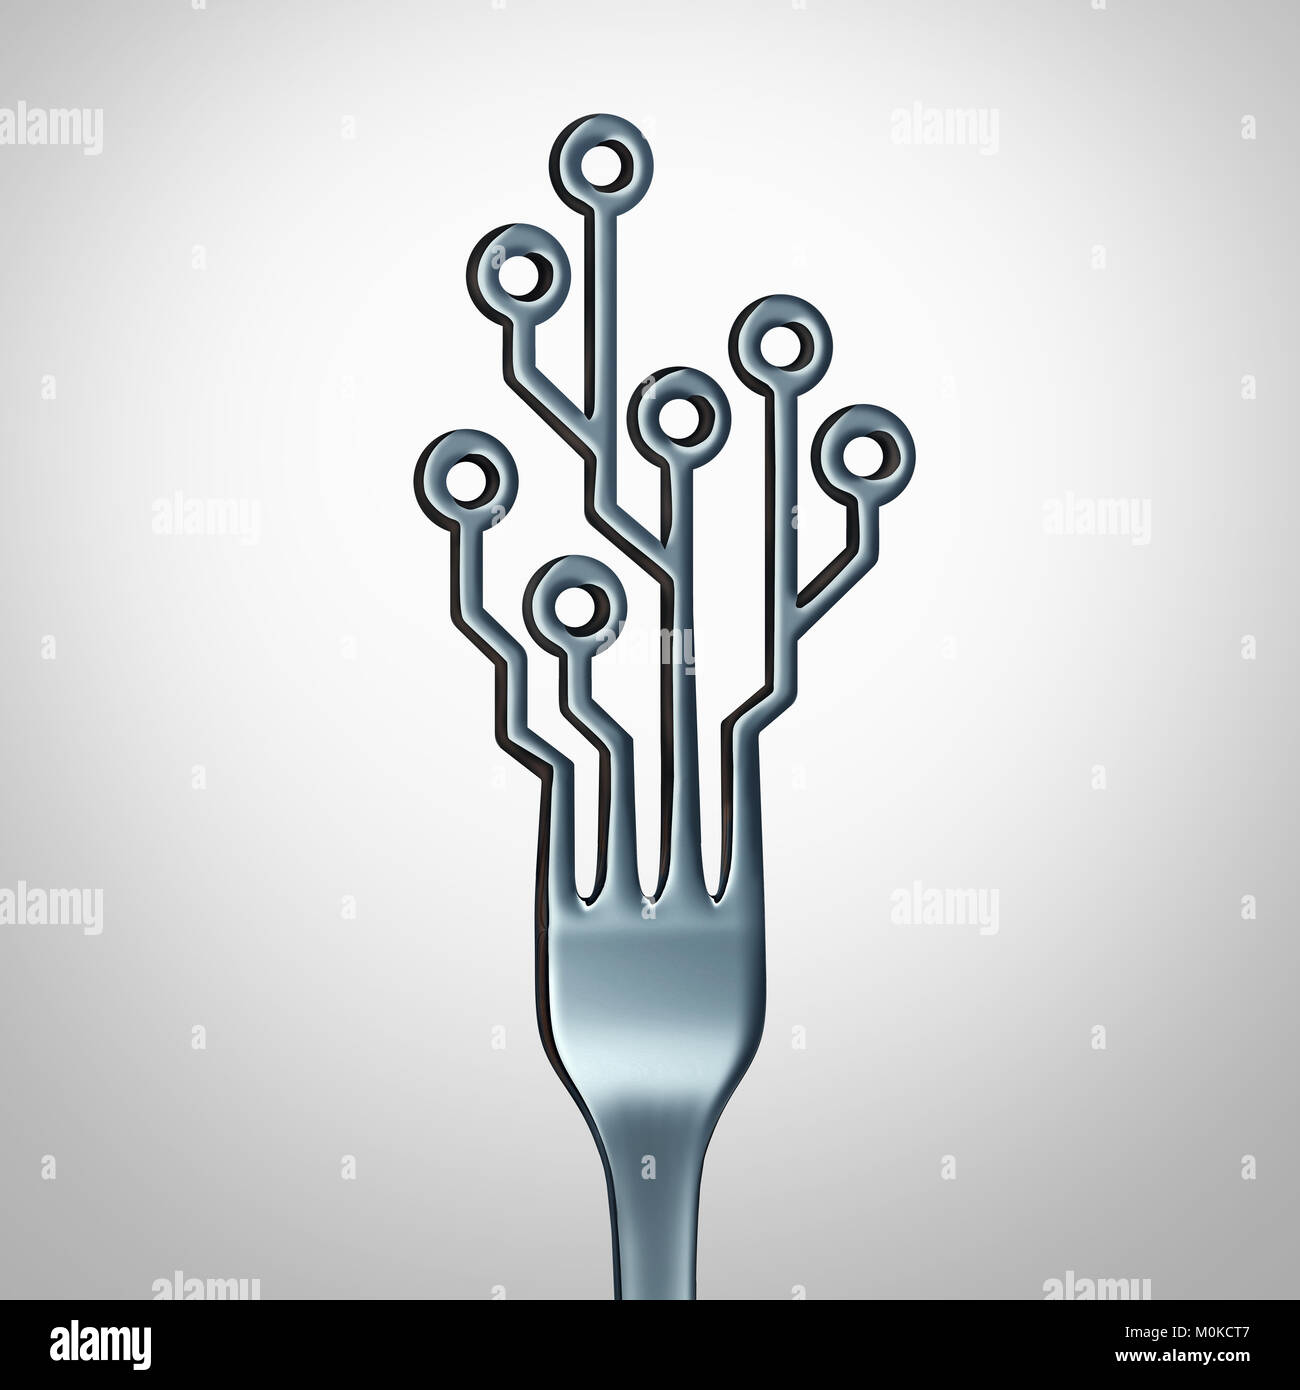 Digital food online and eating diet technology delivery and internet restaurant technology symbol as a dinner fork shaped as a computer circuit. Stock Photo